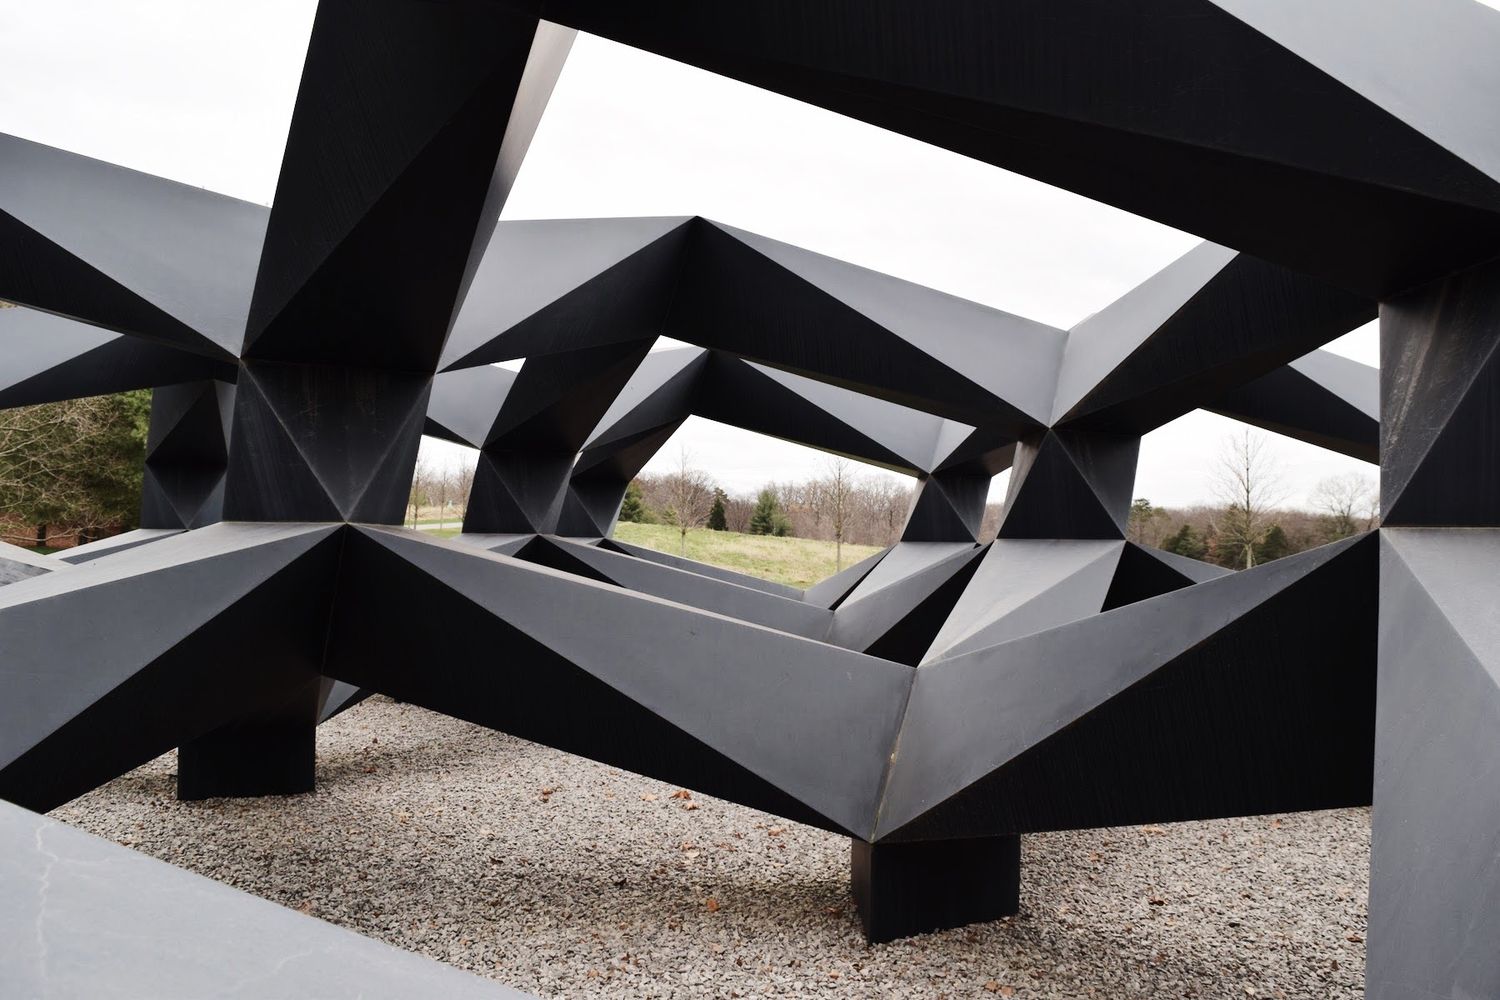 Glenstone, a Private Art Collection in Maryland